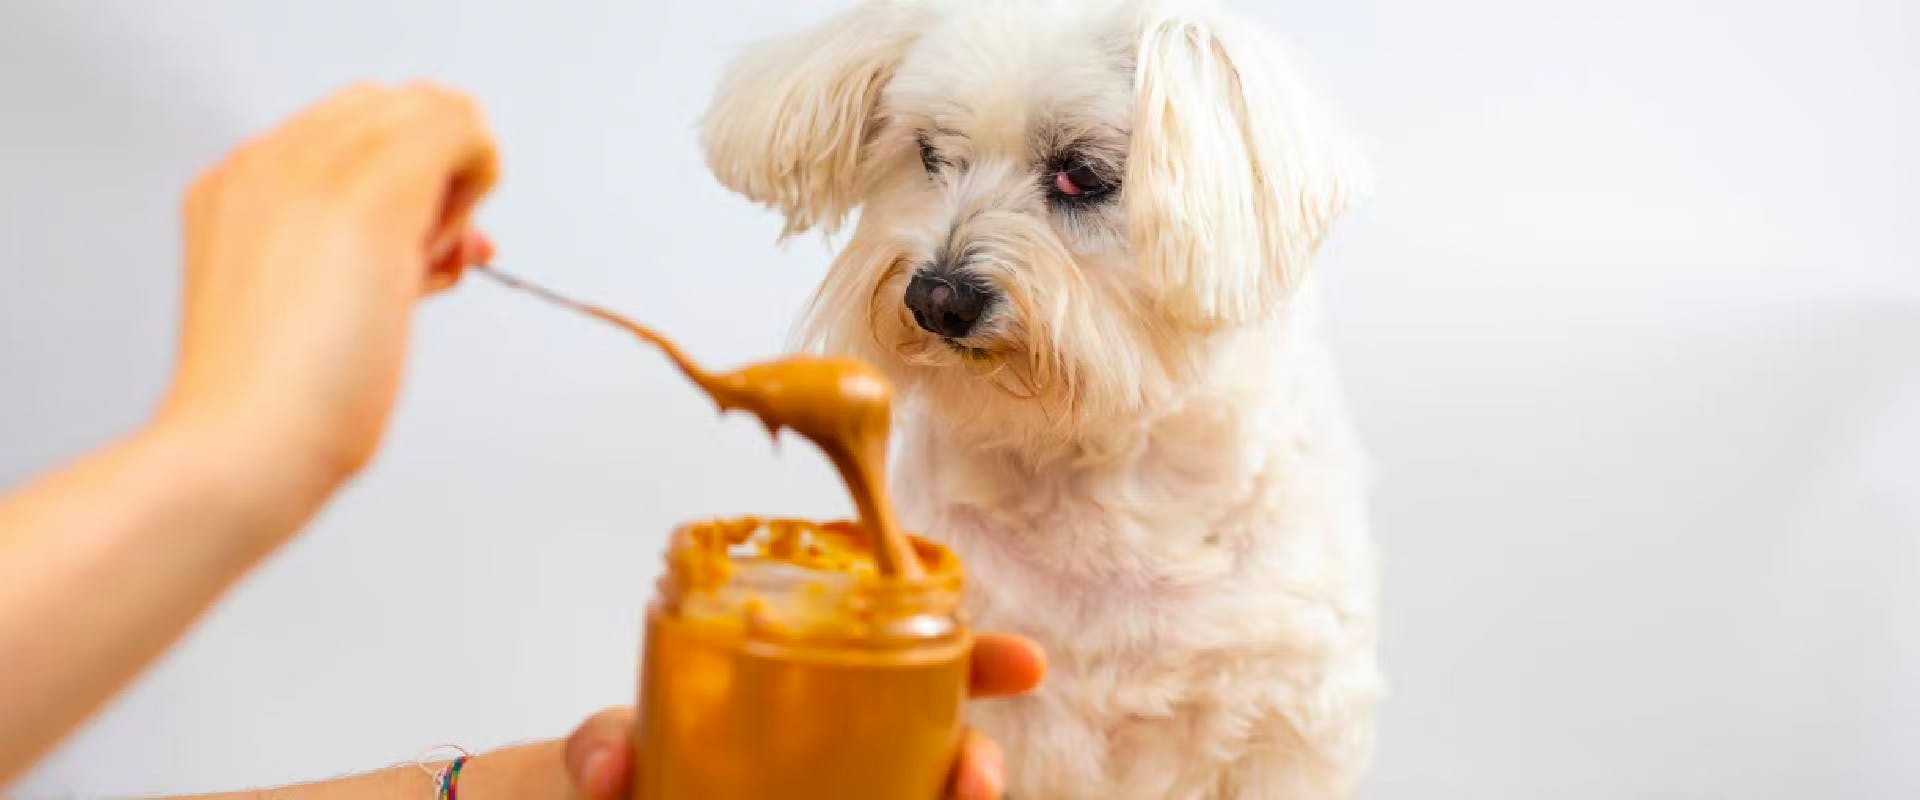 A person's hand spooning peanut butter out of a jar, a small white dog looking on